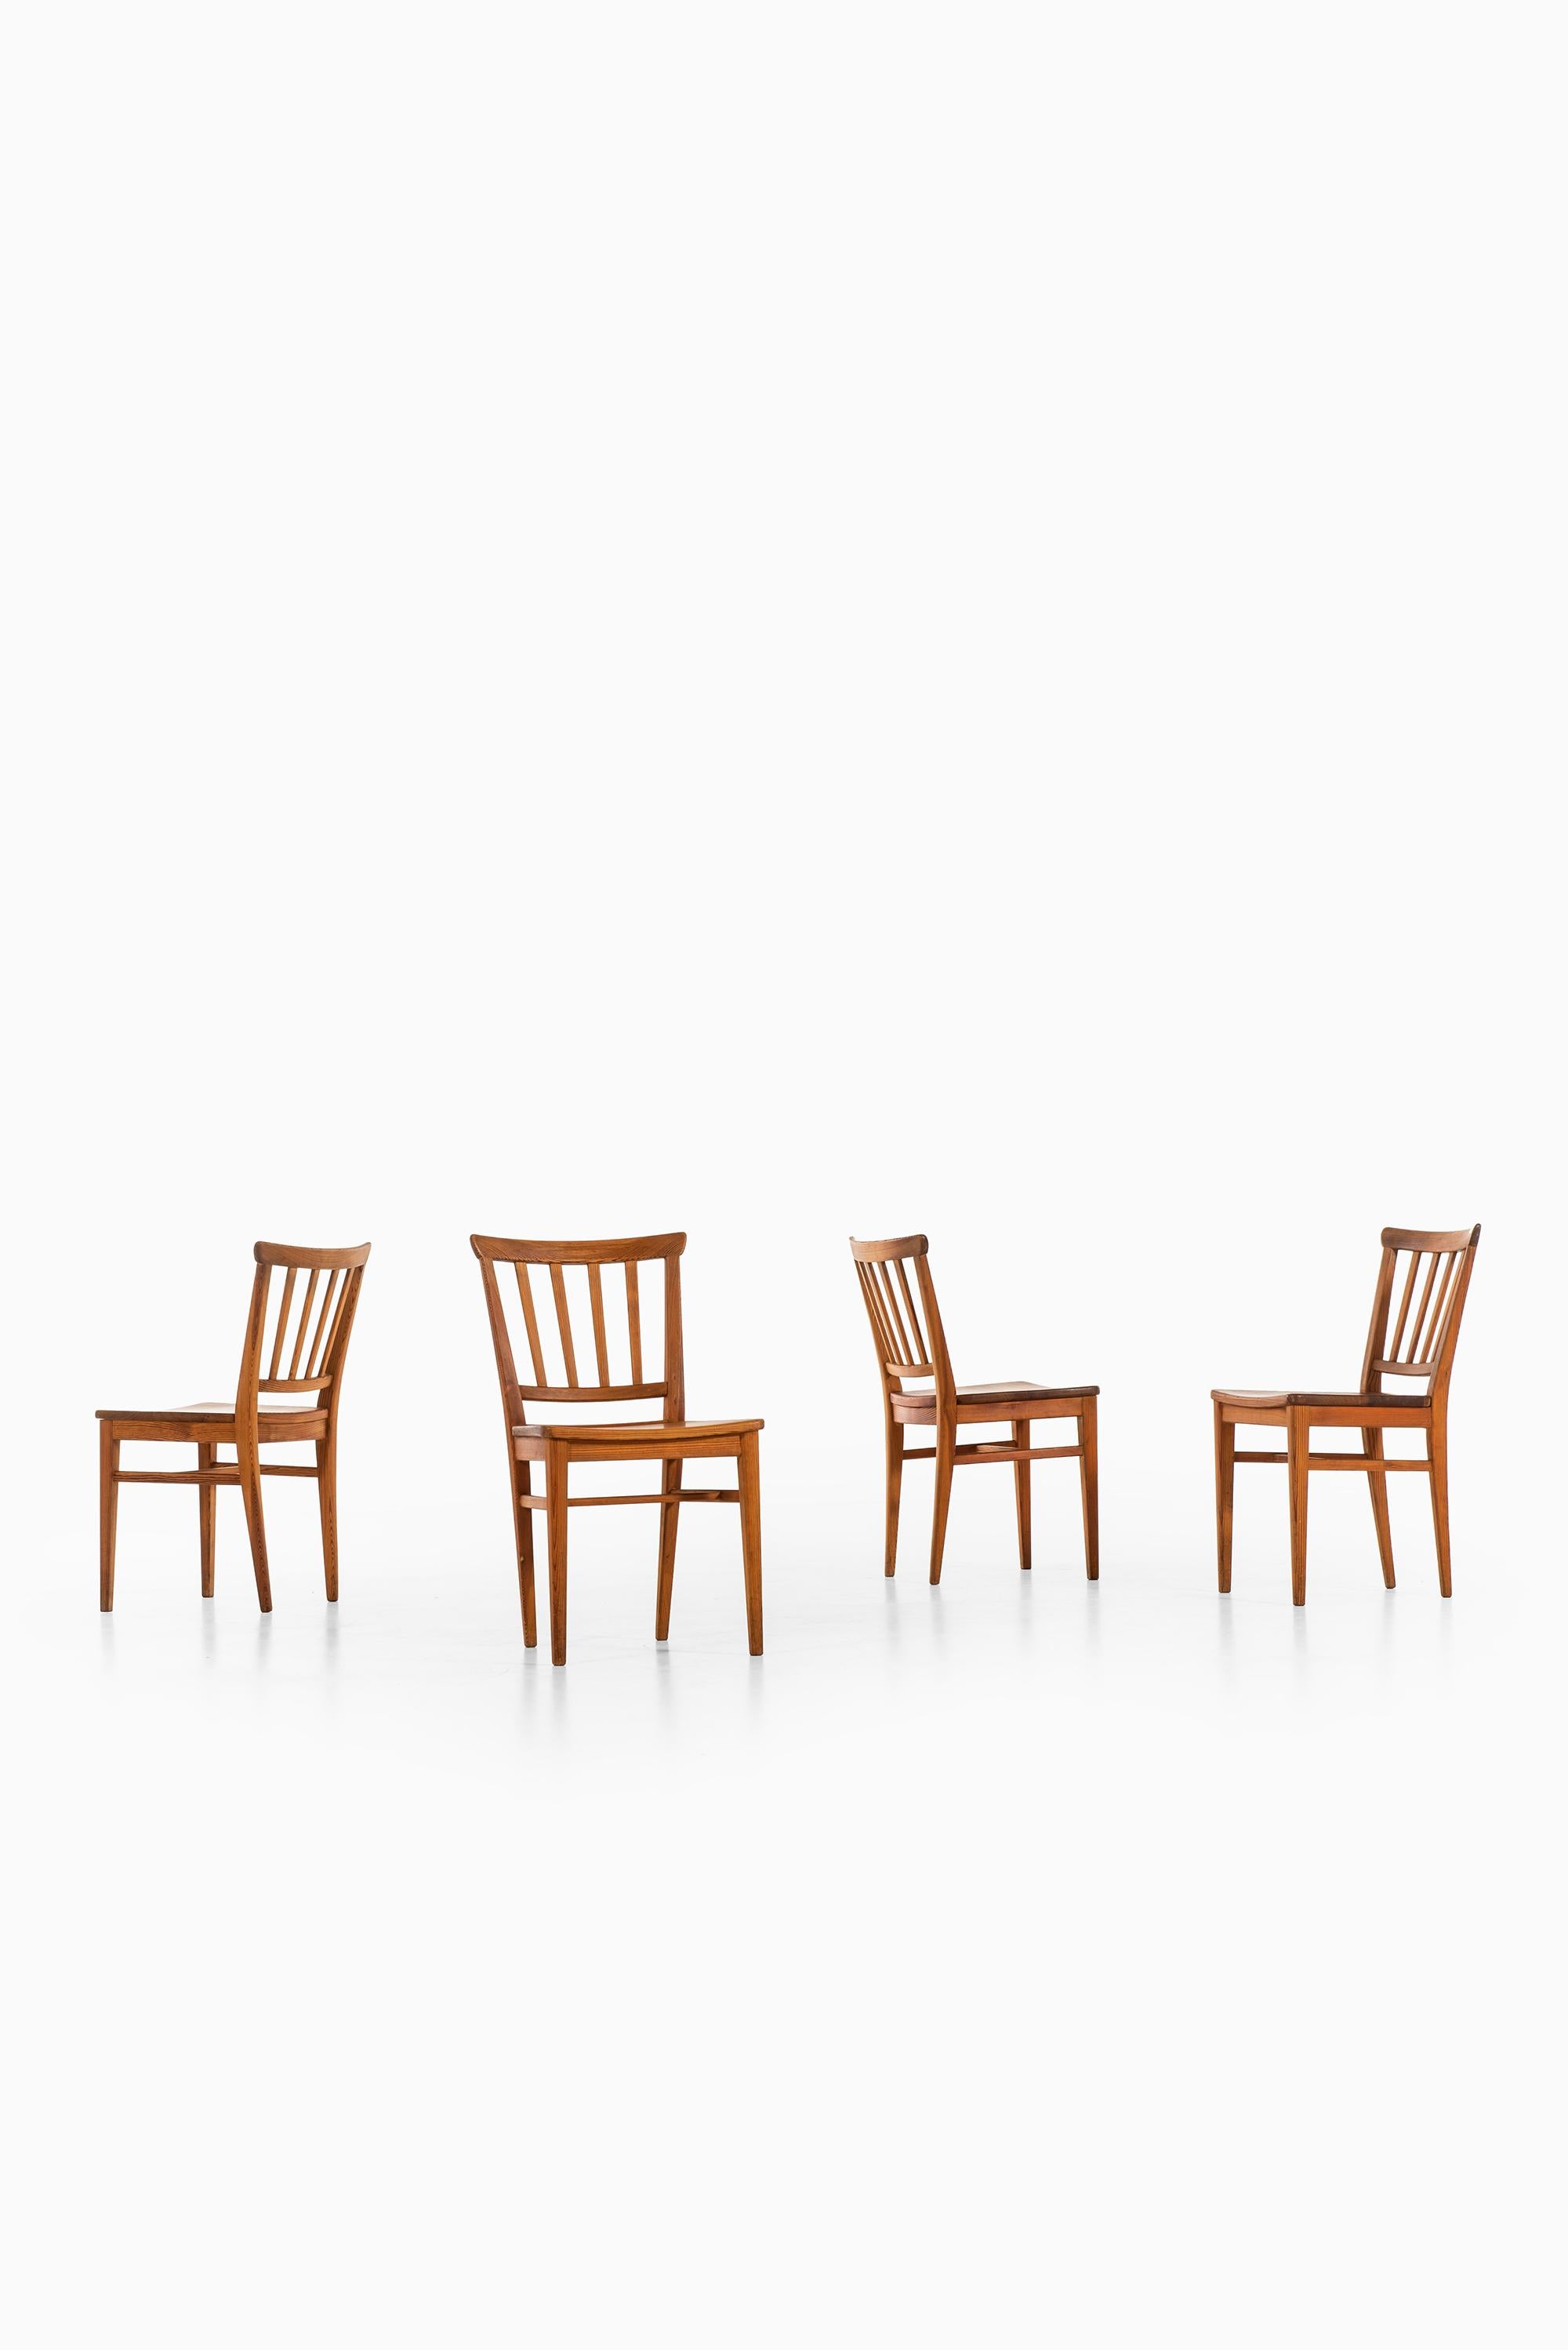 Rare set of 4 dining chairs designed by Carl Malmsten. Produced by Karl Andersson & Söner in Sweden.